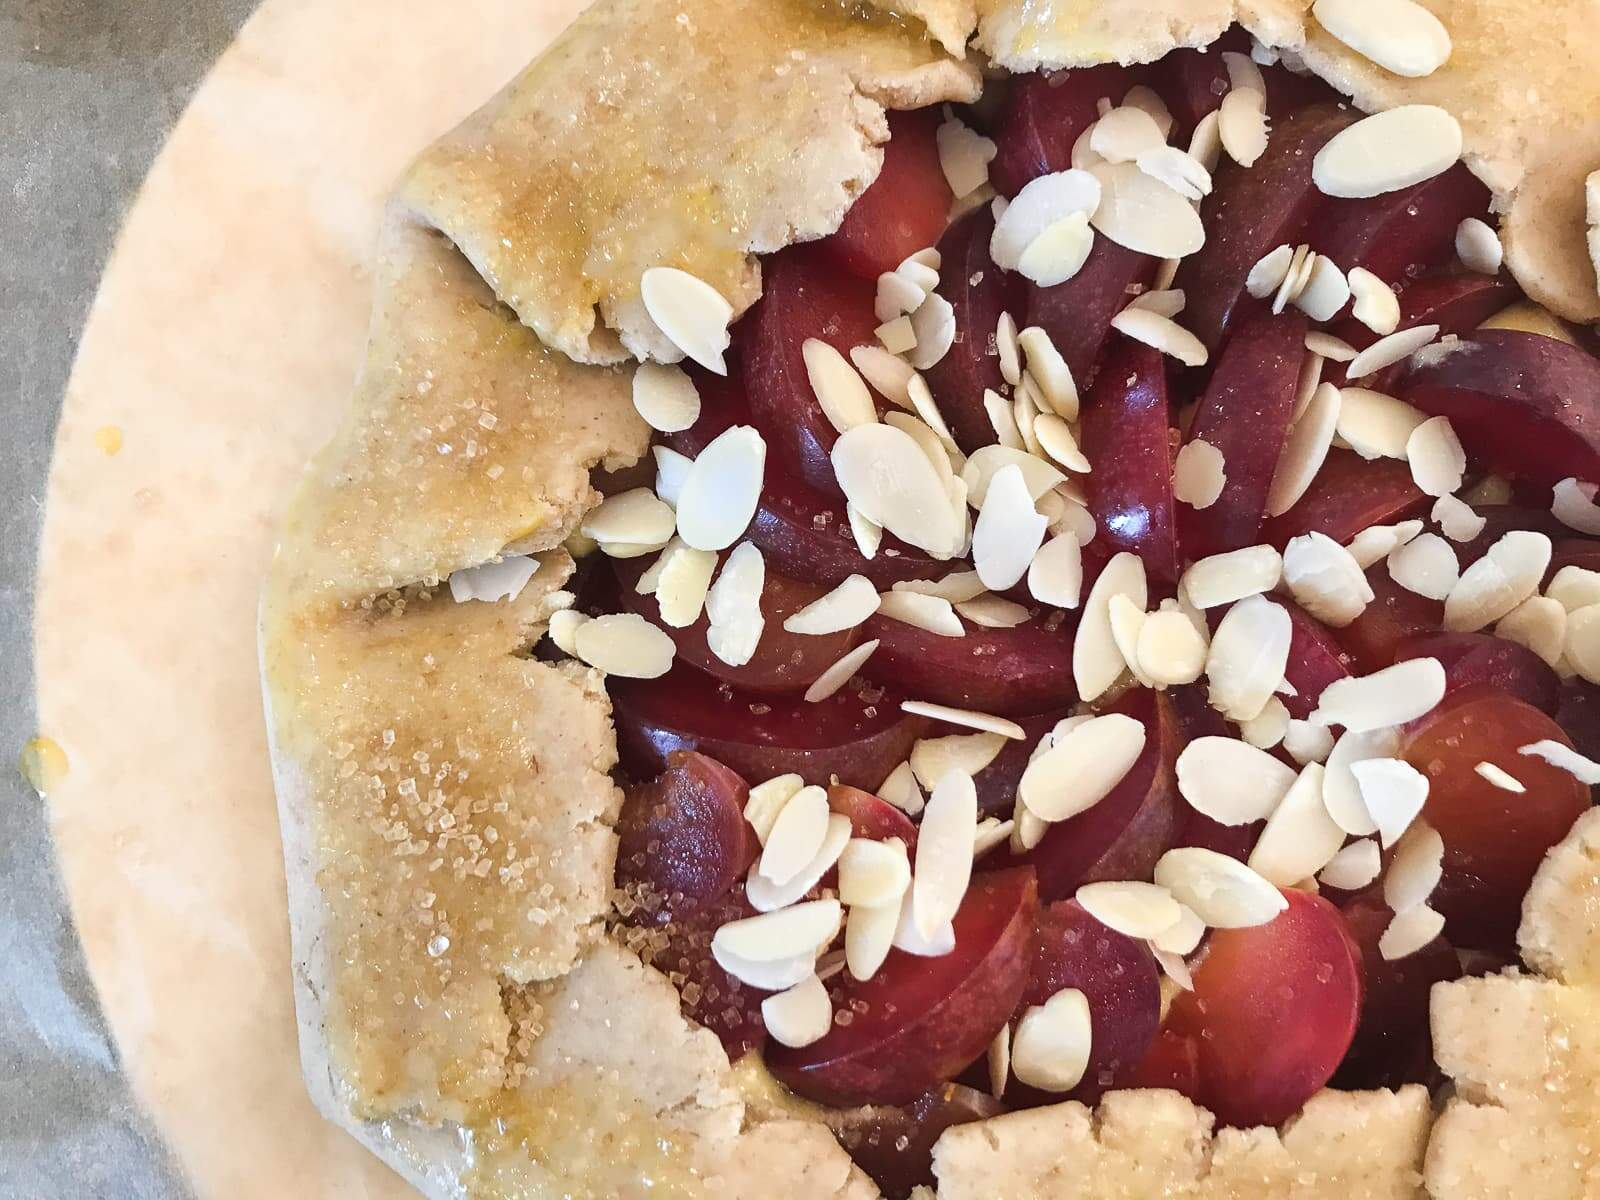 A plum tart topped with almonds and demerara sugar ready to be baked.